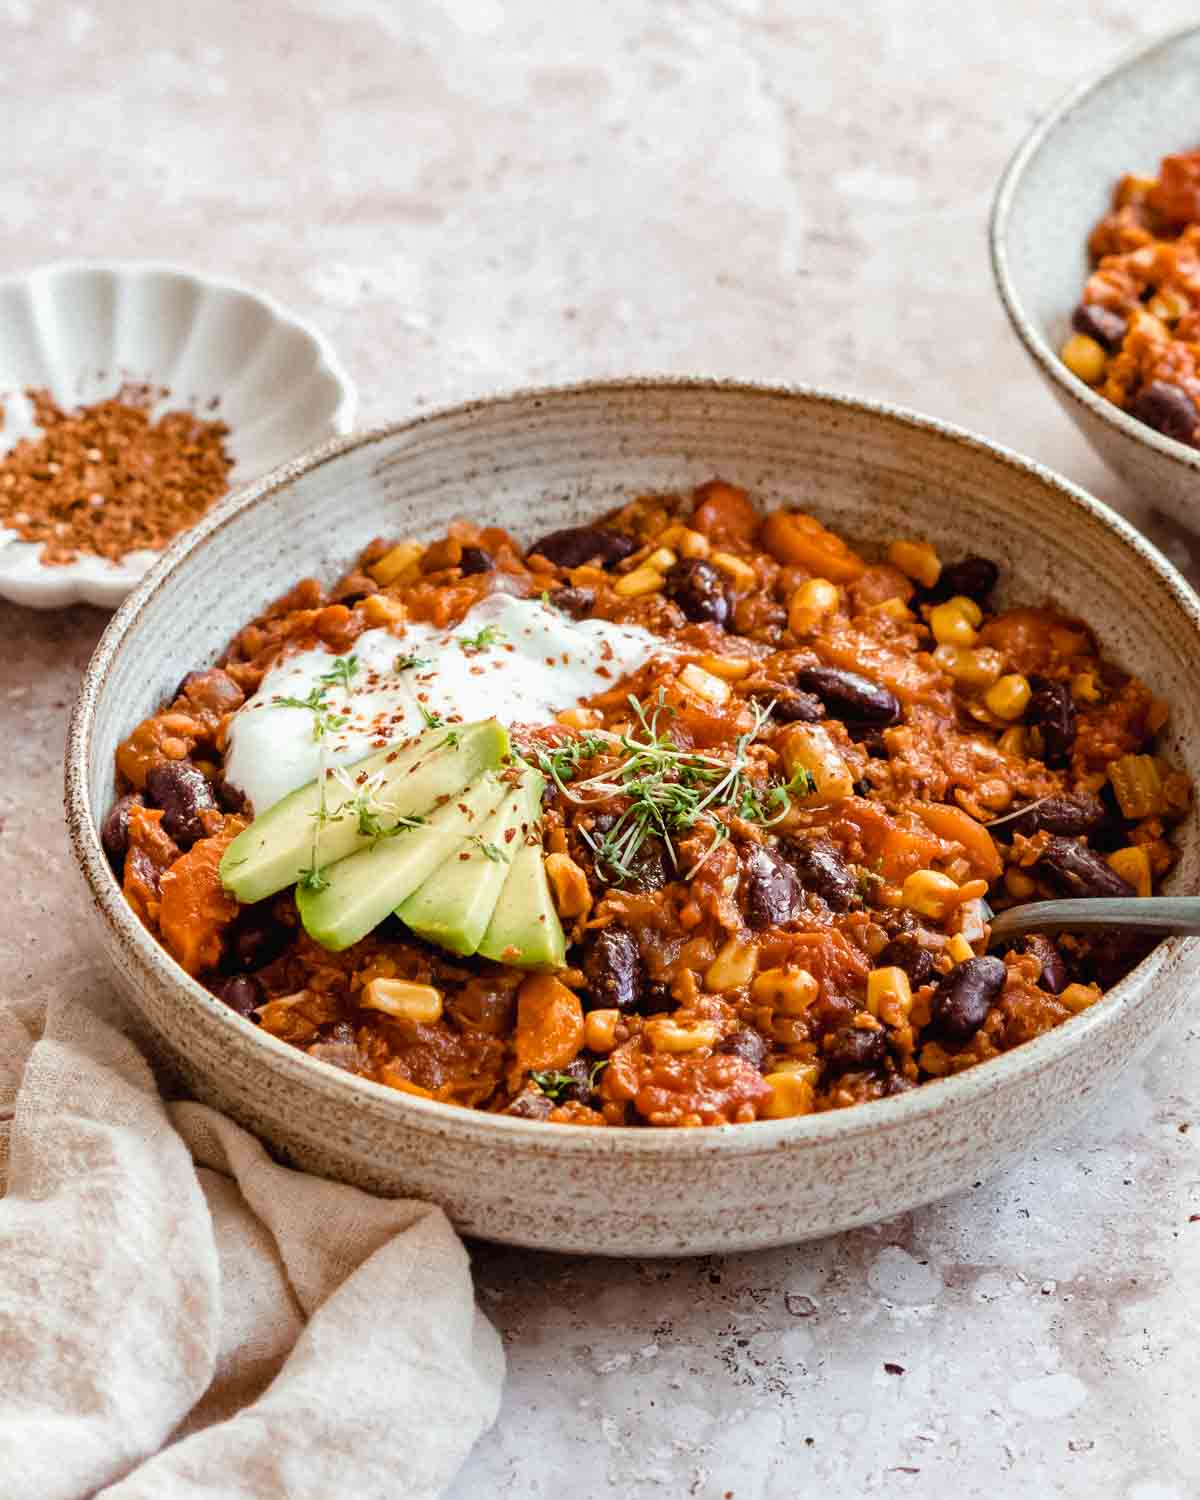 bowl of vegetarian chili con carne topped with fresh avocado slices and plain yogurt.